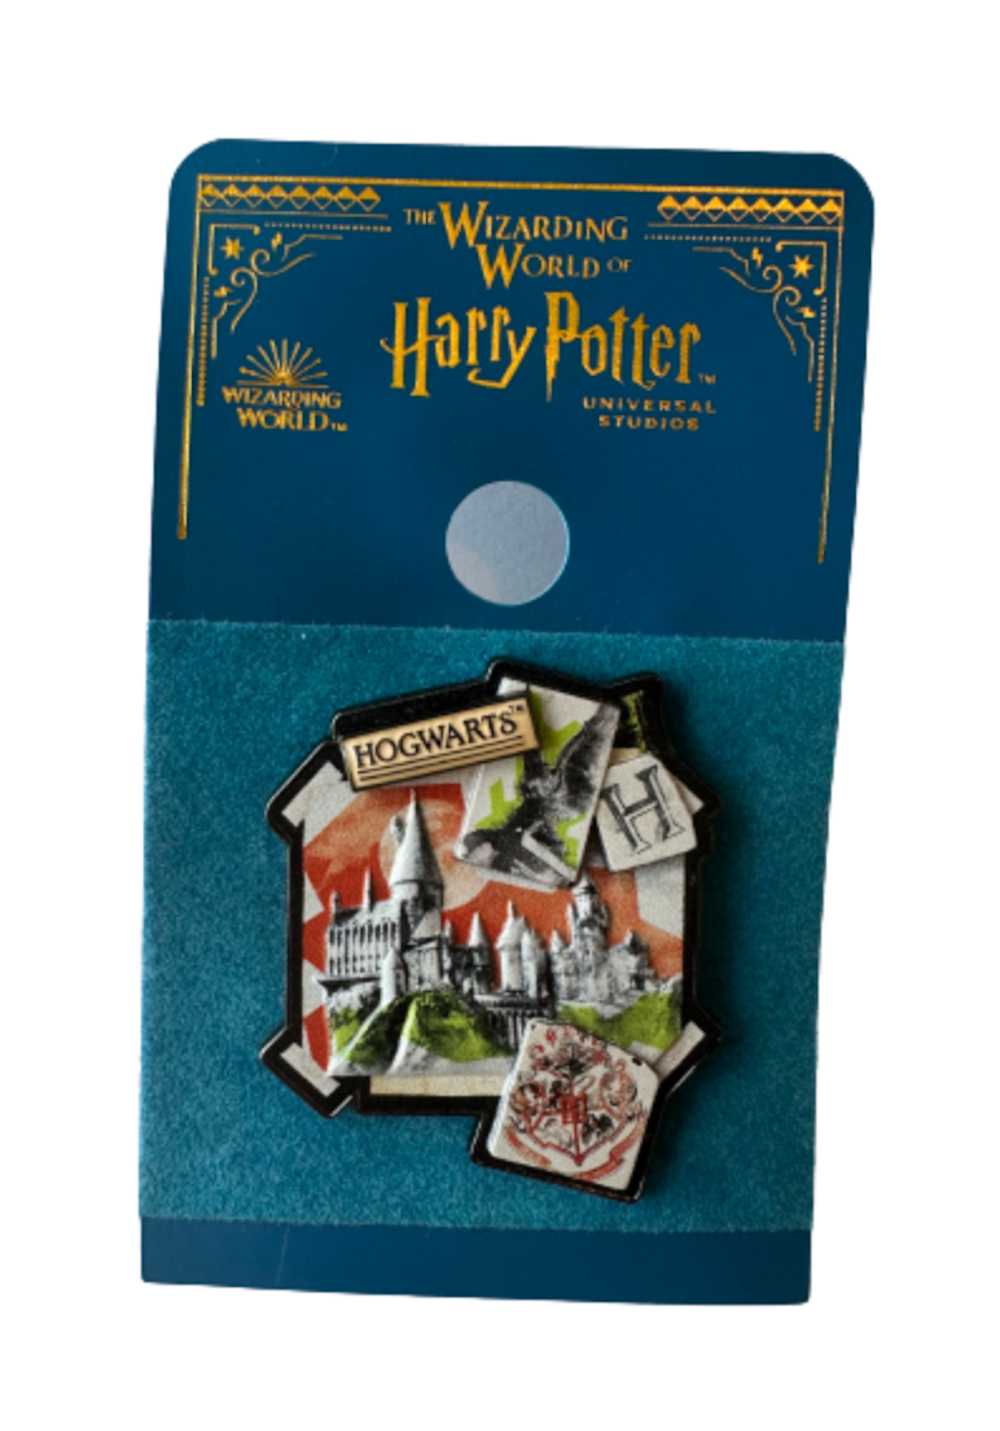 Universal Studios Wizarding World Of Harry Potter Hogwarts 3D Pin New with Card